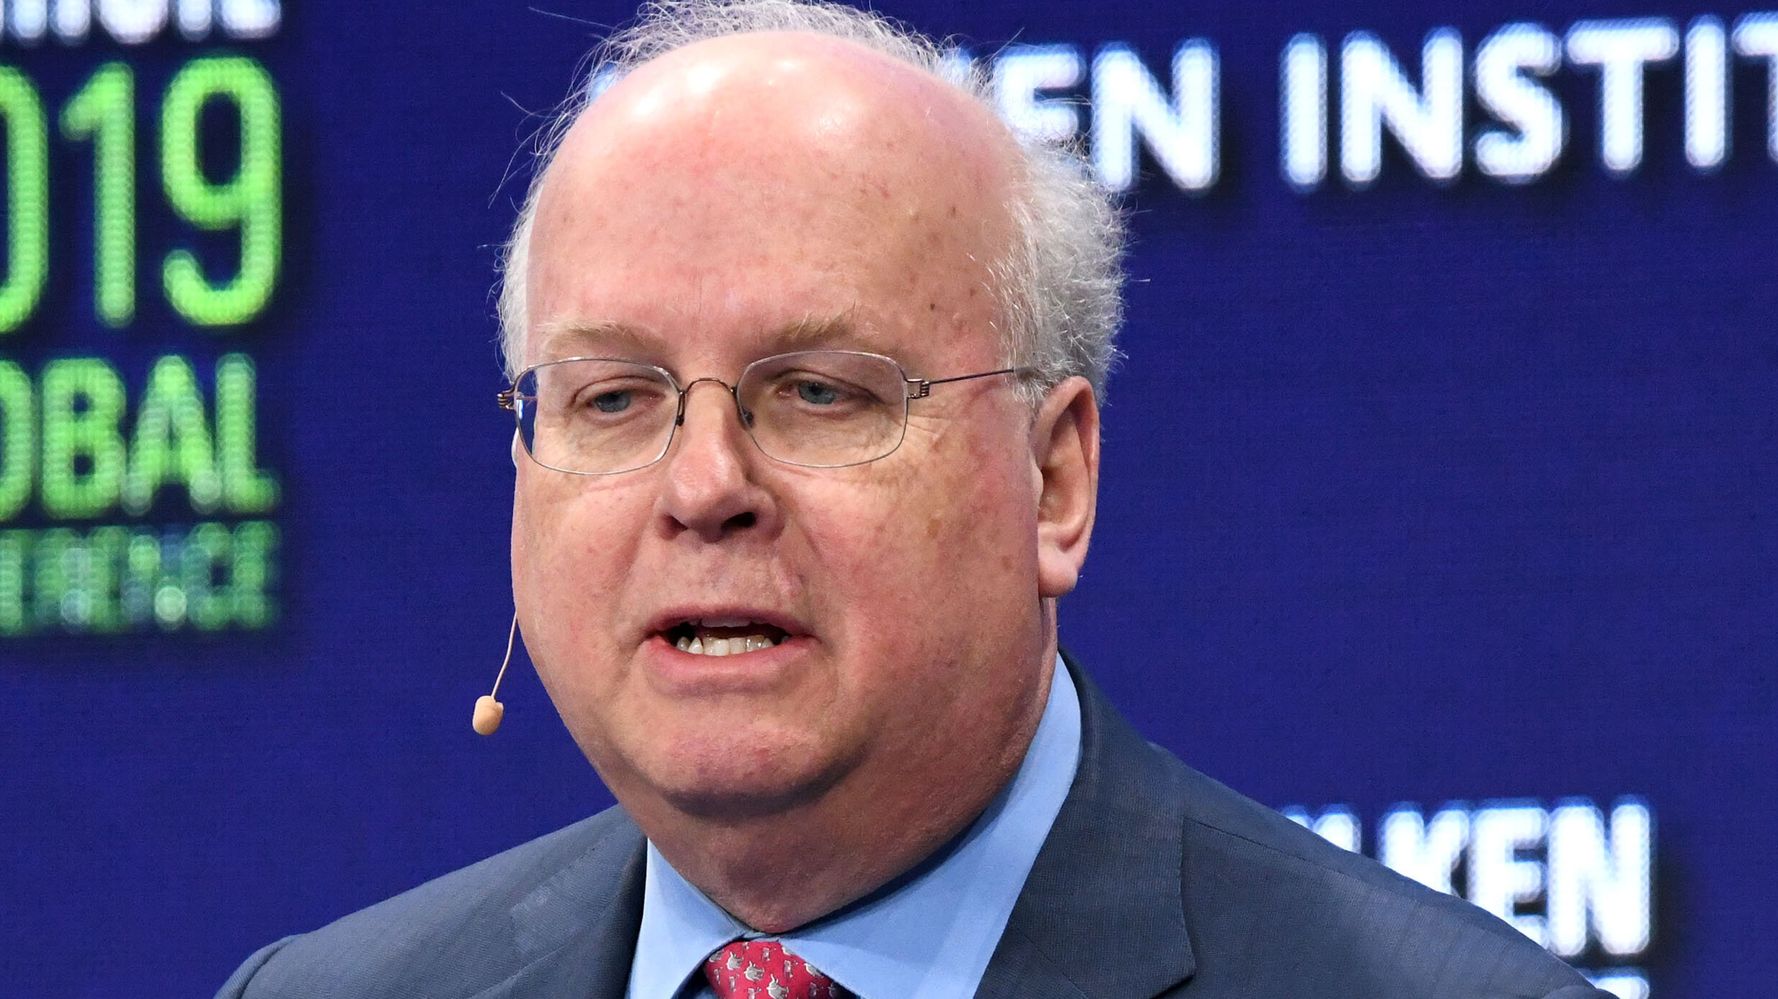 Karl Rove Predicts Donald Trump Will Fail To Overturn Election Result